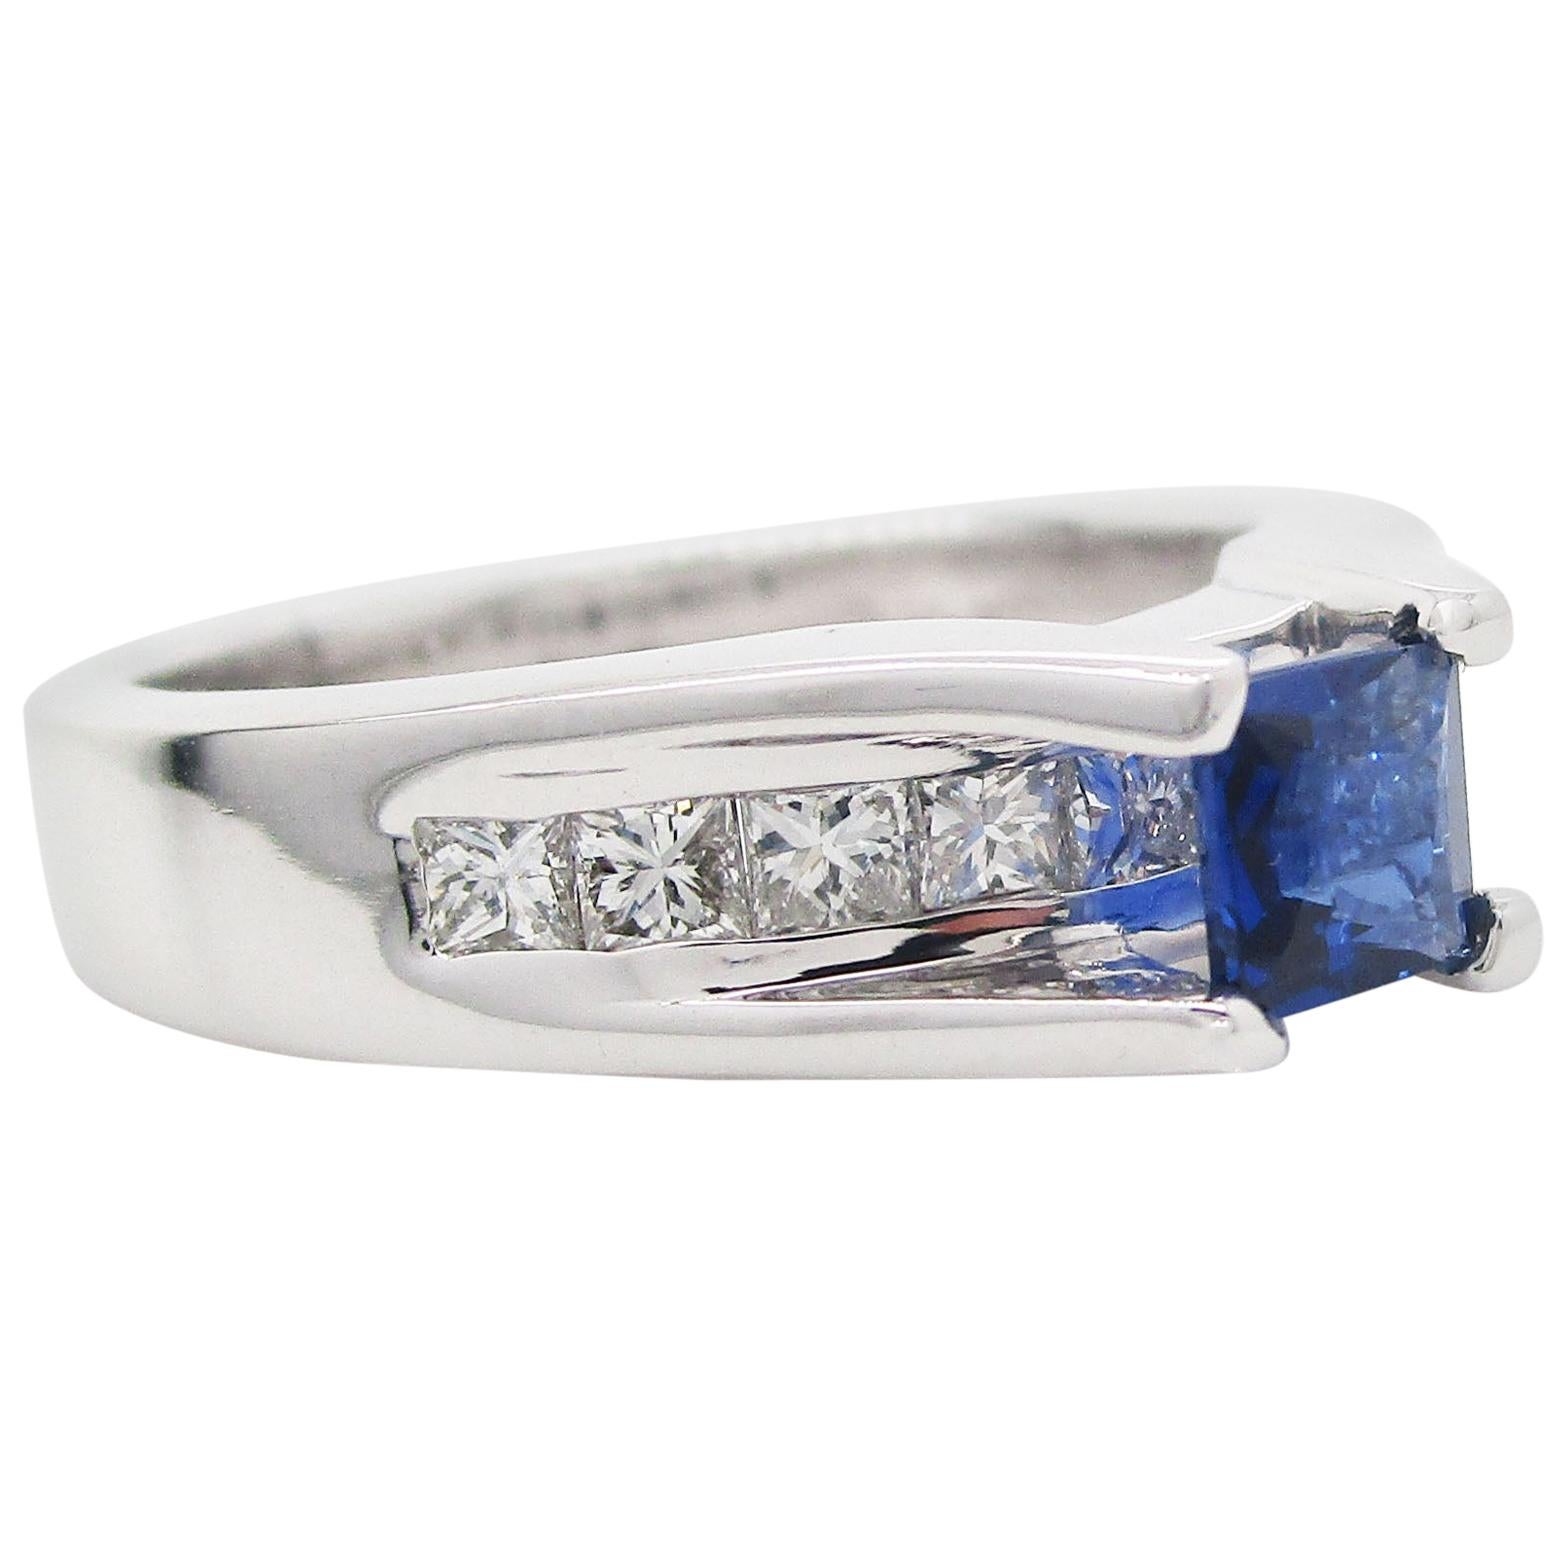 This is a magnificent ring in 14k white gold featuring a beautiful blue sapphire center and a row of channel-set diamonds. The sapphire center is a gorgeous rich blue stone whose hues are reminiscent of a velvety dusk sky. The sapphire is set over a